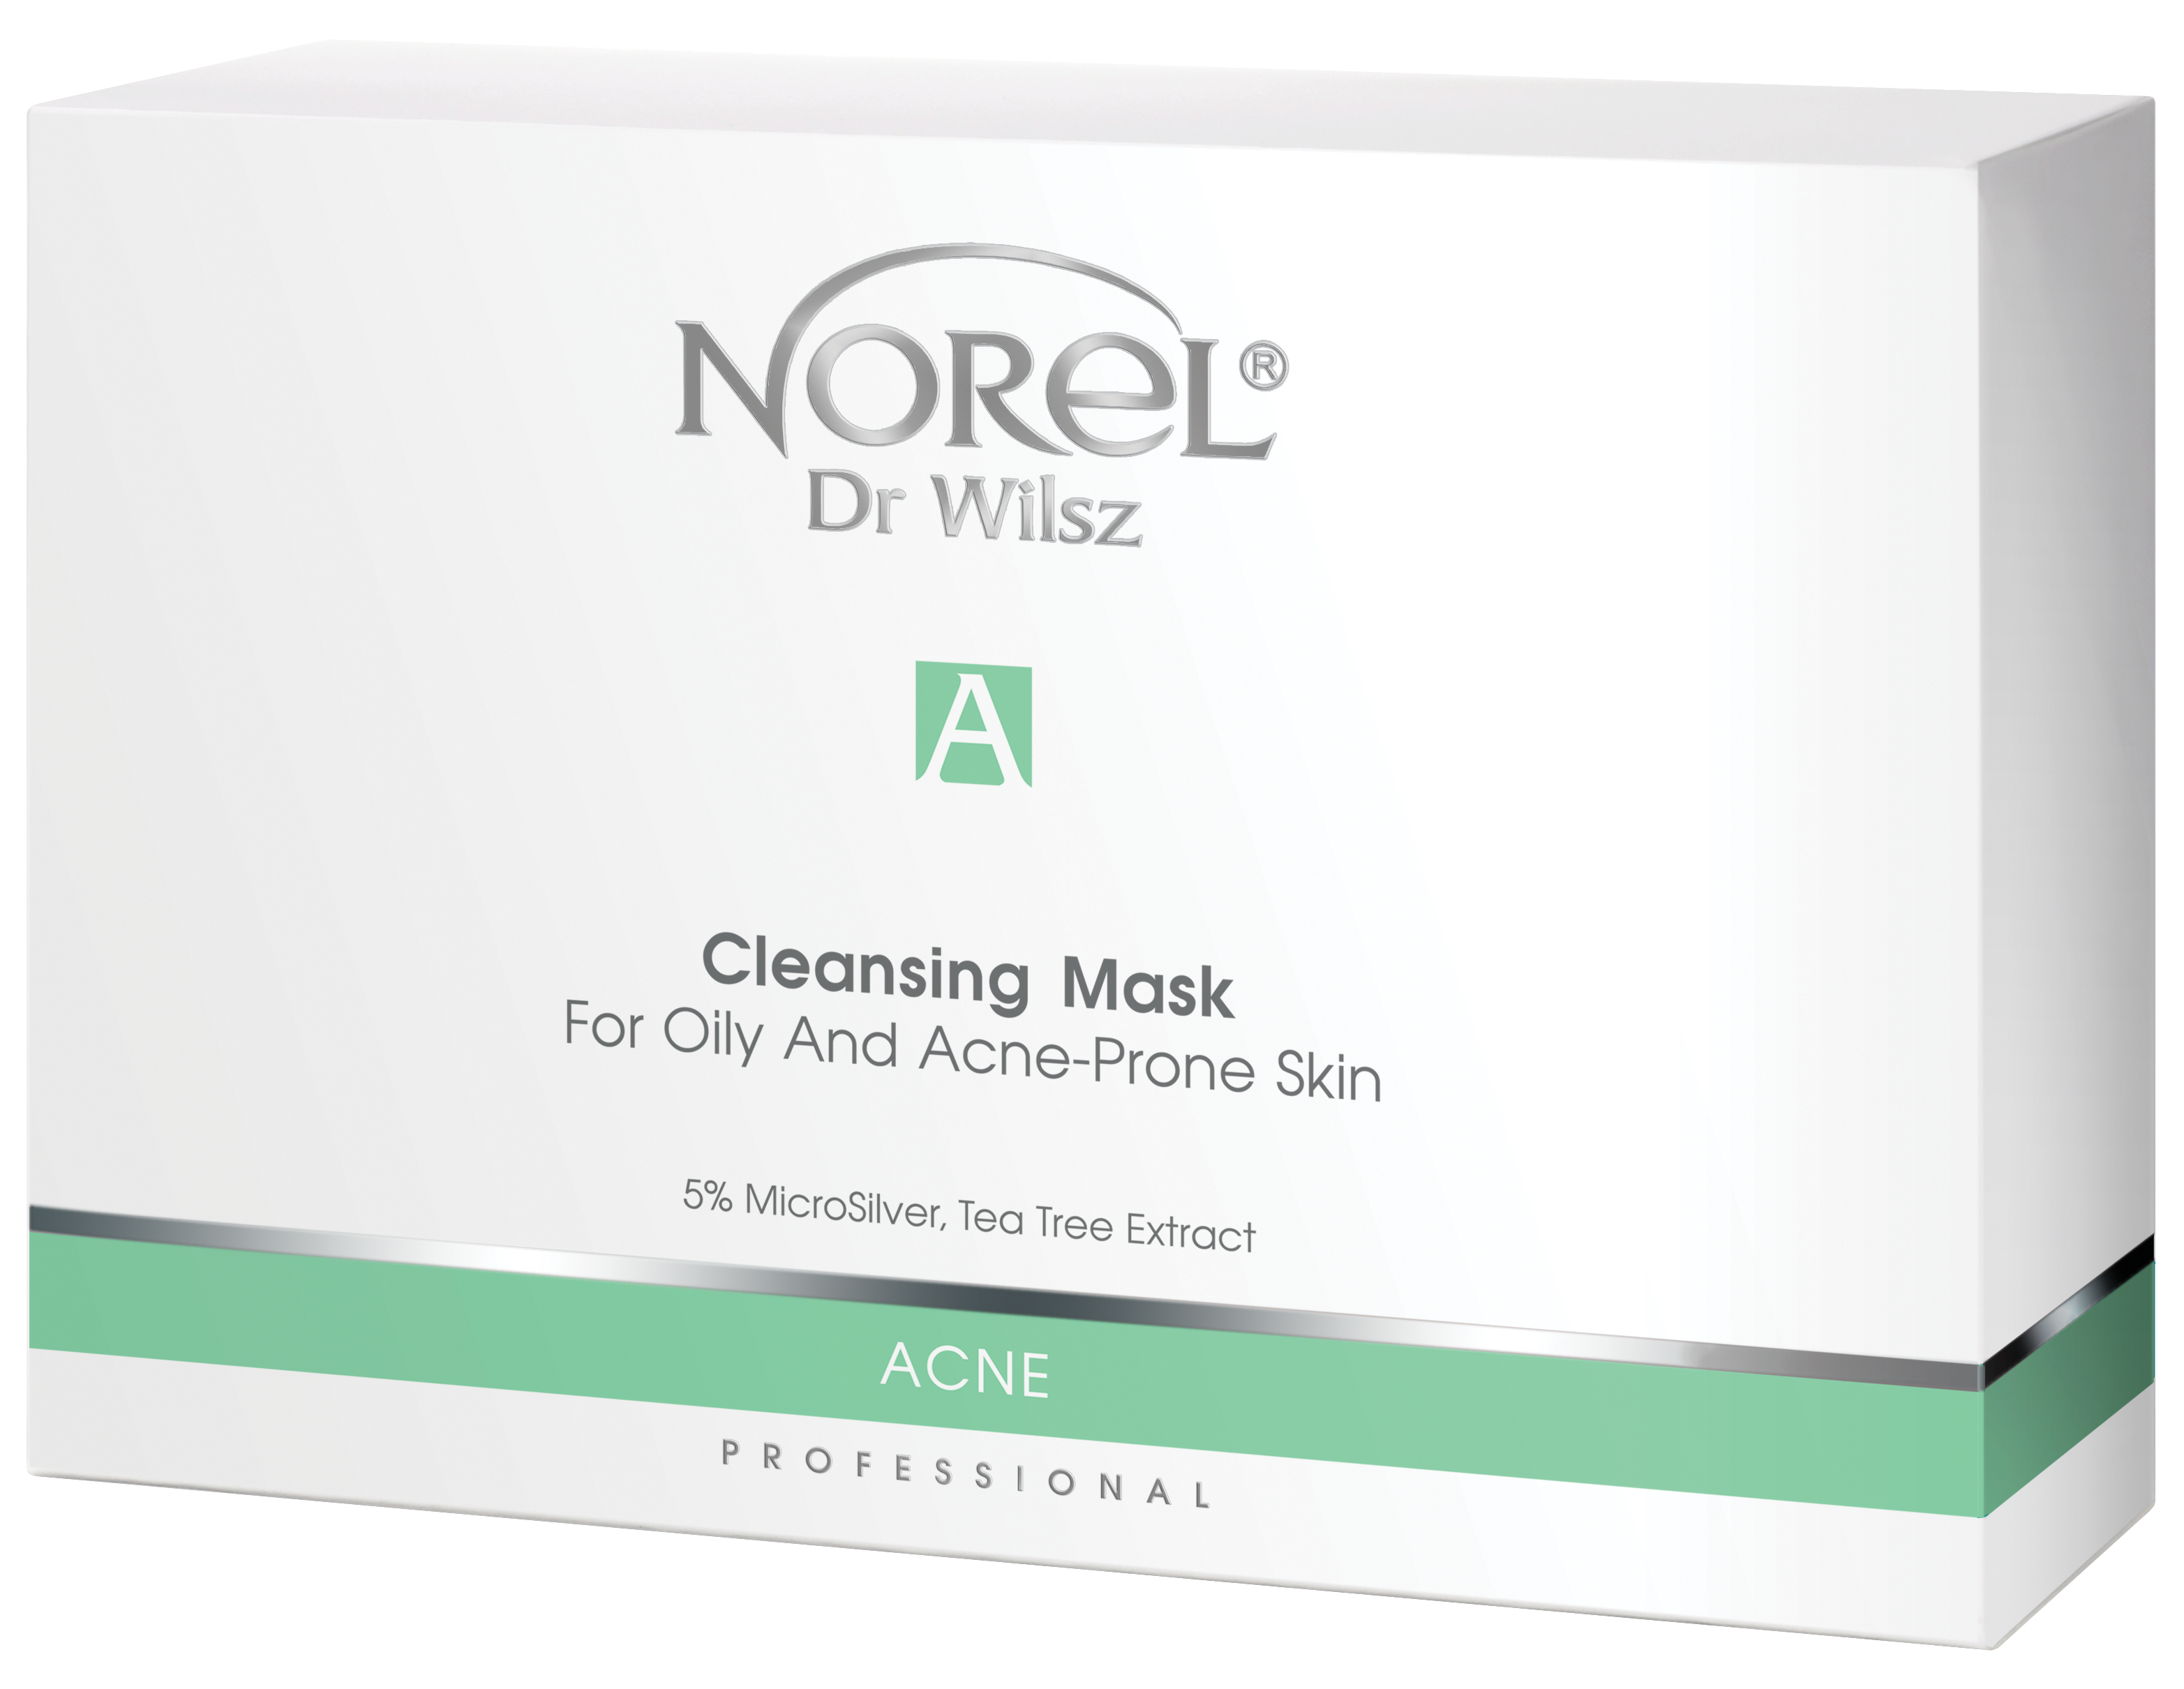 Cleansing Mask (Vliesmaske) For Oily And Acne-Prone Skin